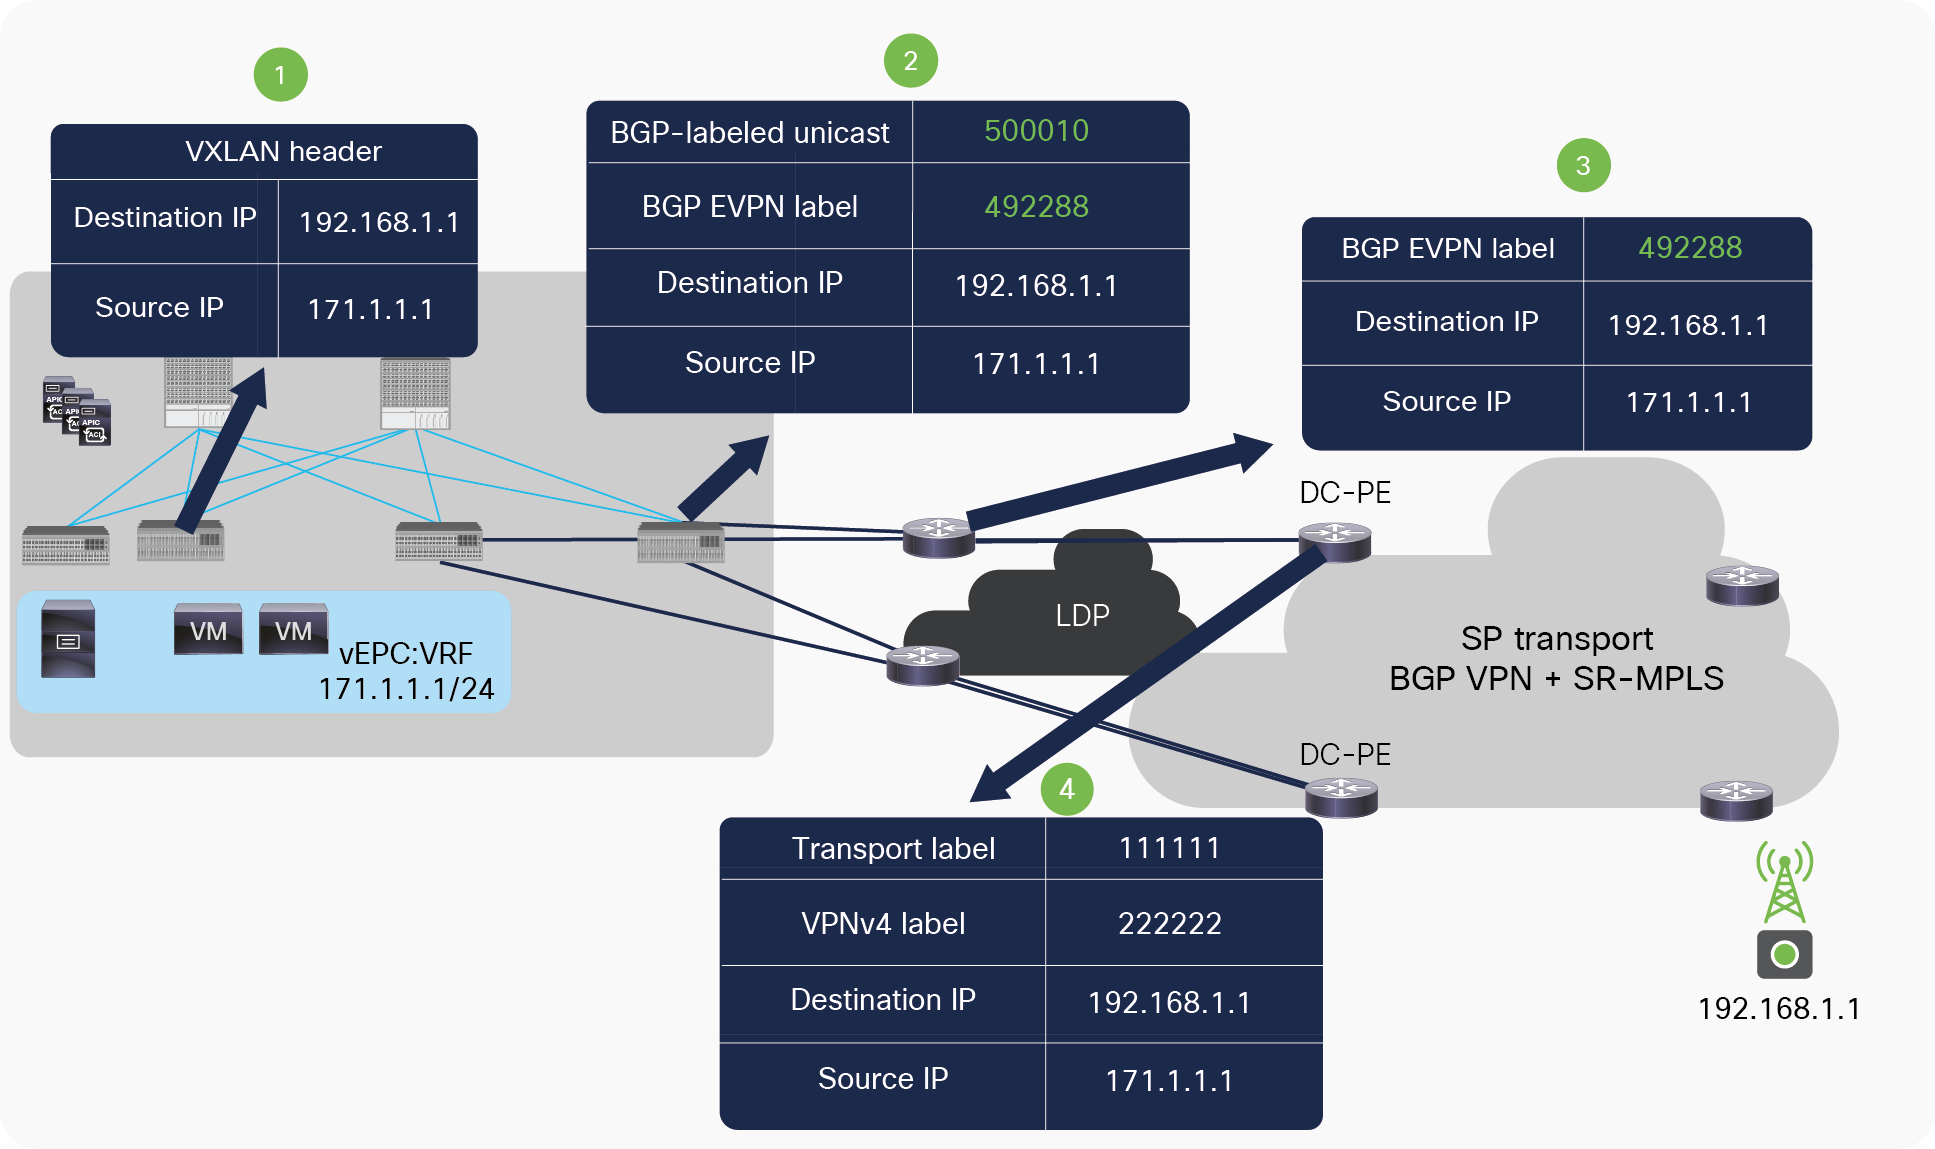 Packet walk from ACI fabric to DC-PE across MPLS LDP network